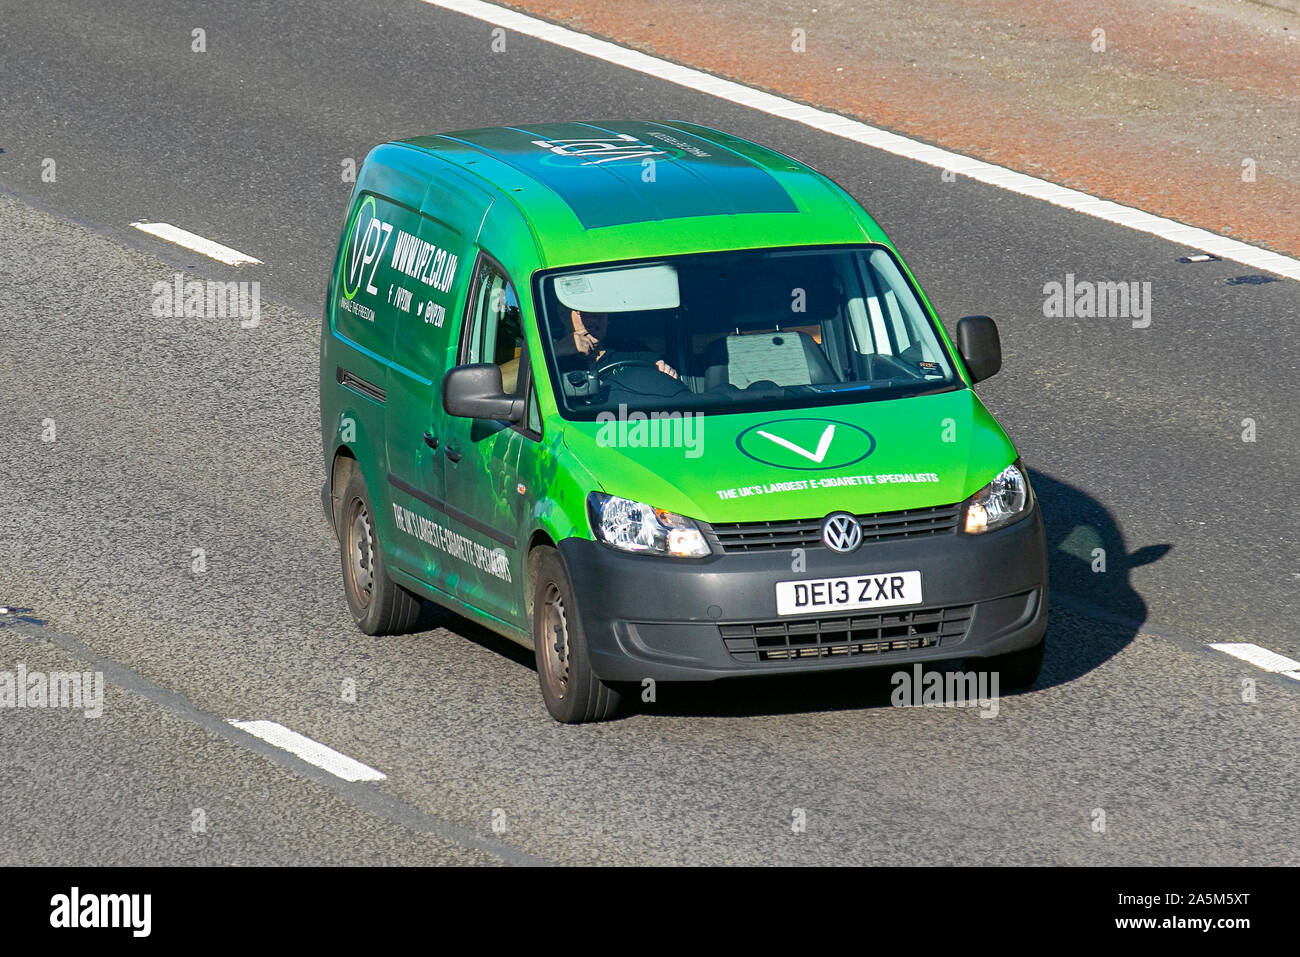 2013 green Volkswagen Caddy Maxi C20 TDI; UK VPZ 'The UK's largest e- cigarette specialists; Commercial vehicular traffic, transport, modern,  business van south-bound on the 3 lane M6 motorway highway Stock Photo -